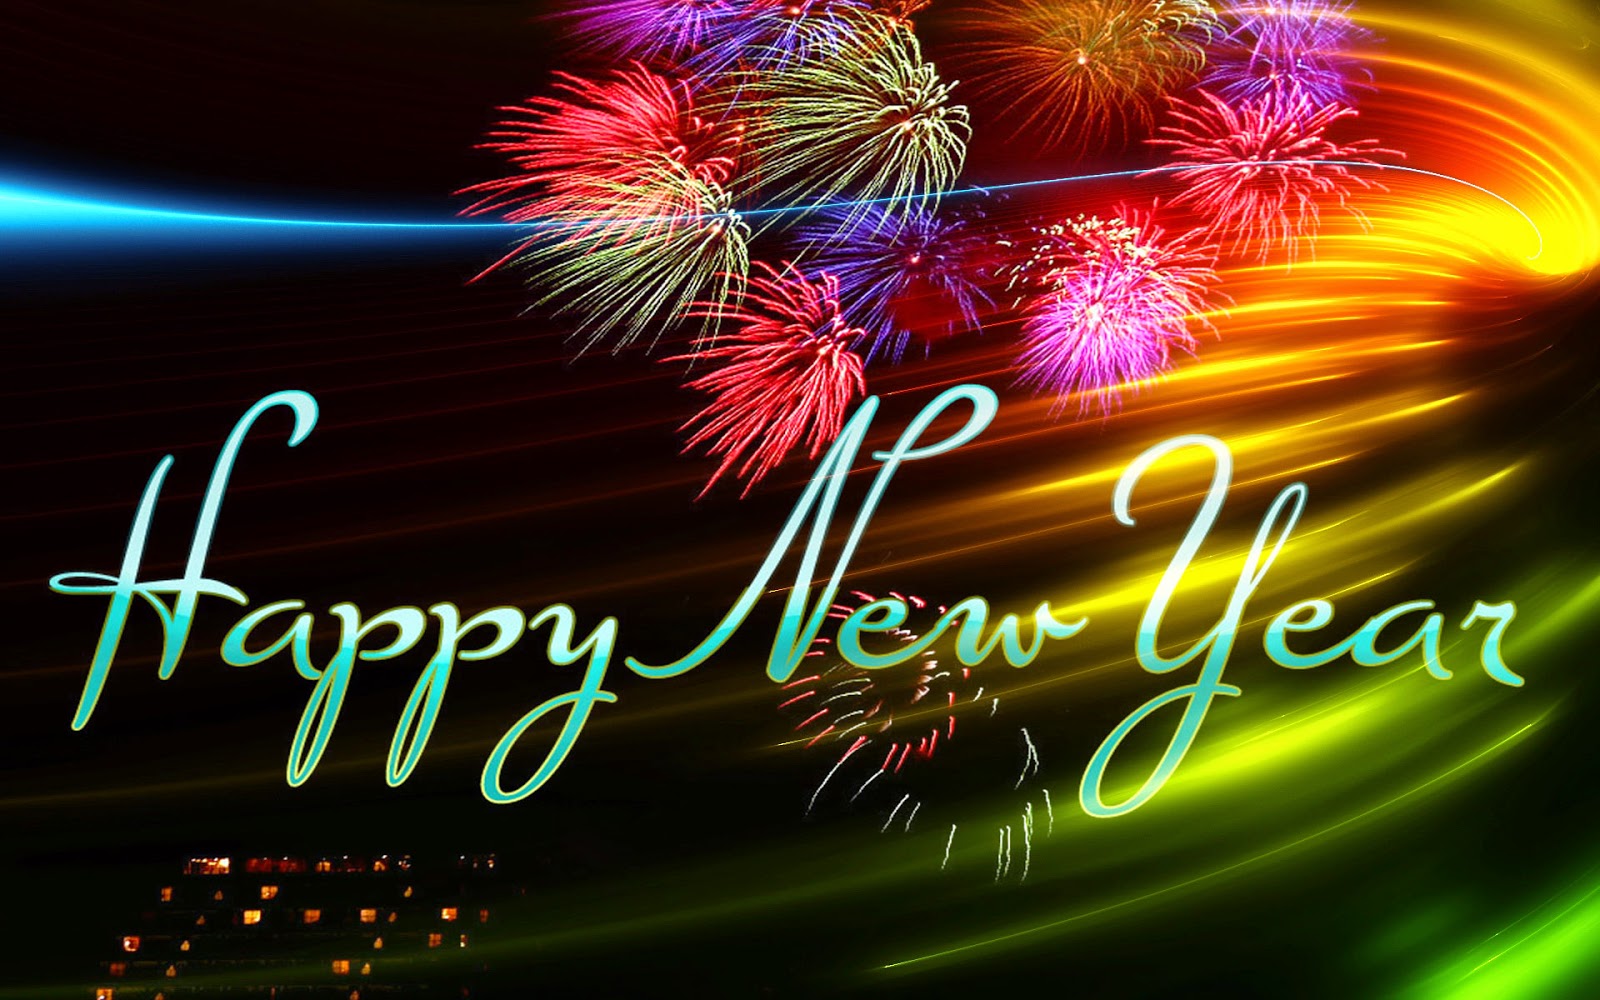 Happy-New-Year-2016-Download-Images-22